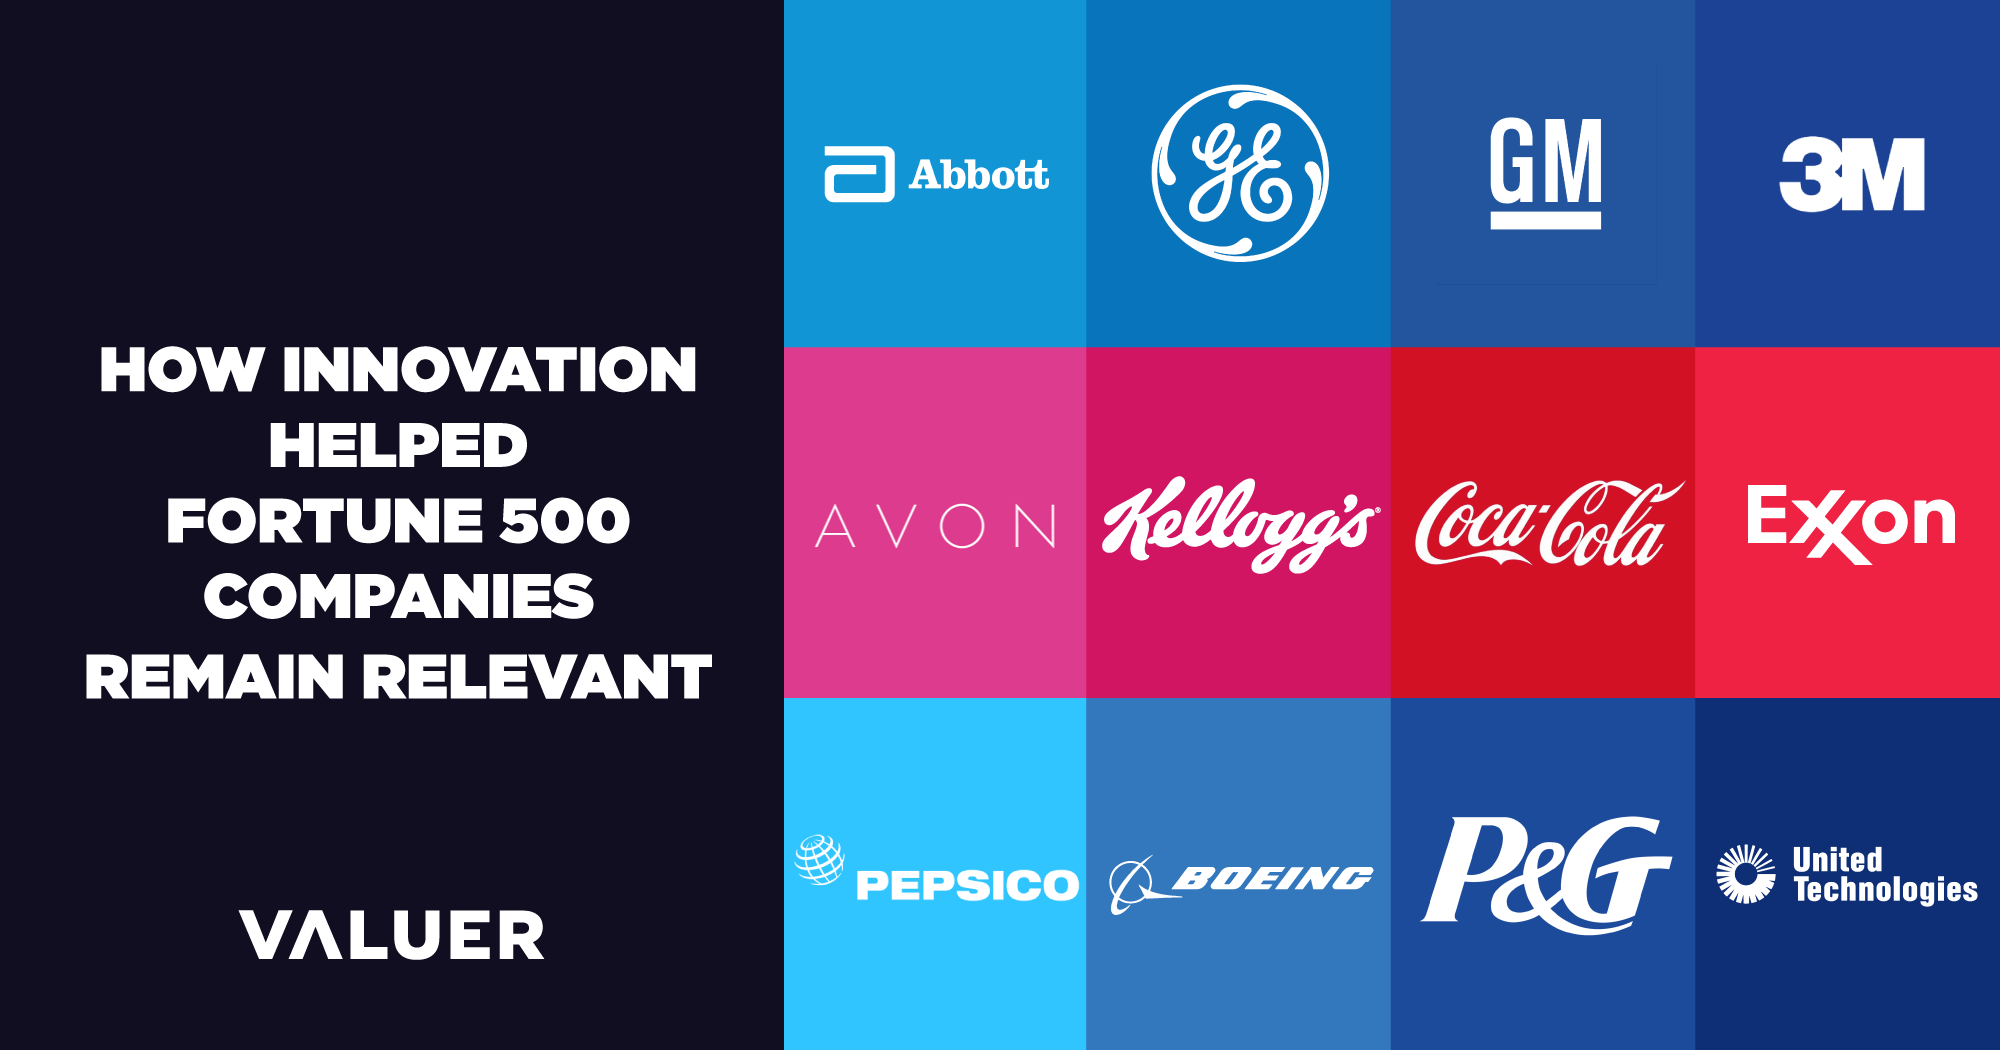 How Innovation Has Helped Fortune 500 Companies